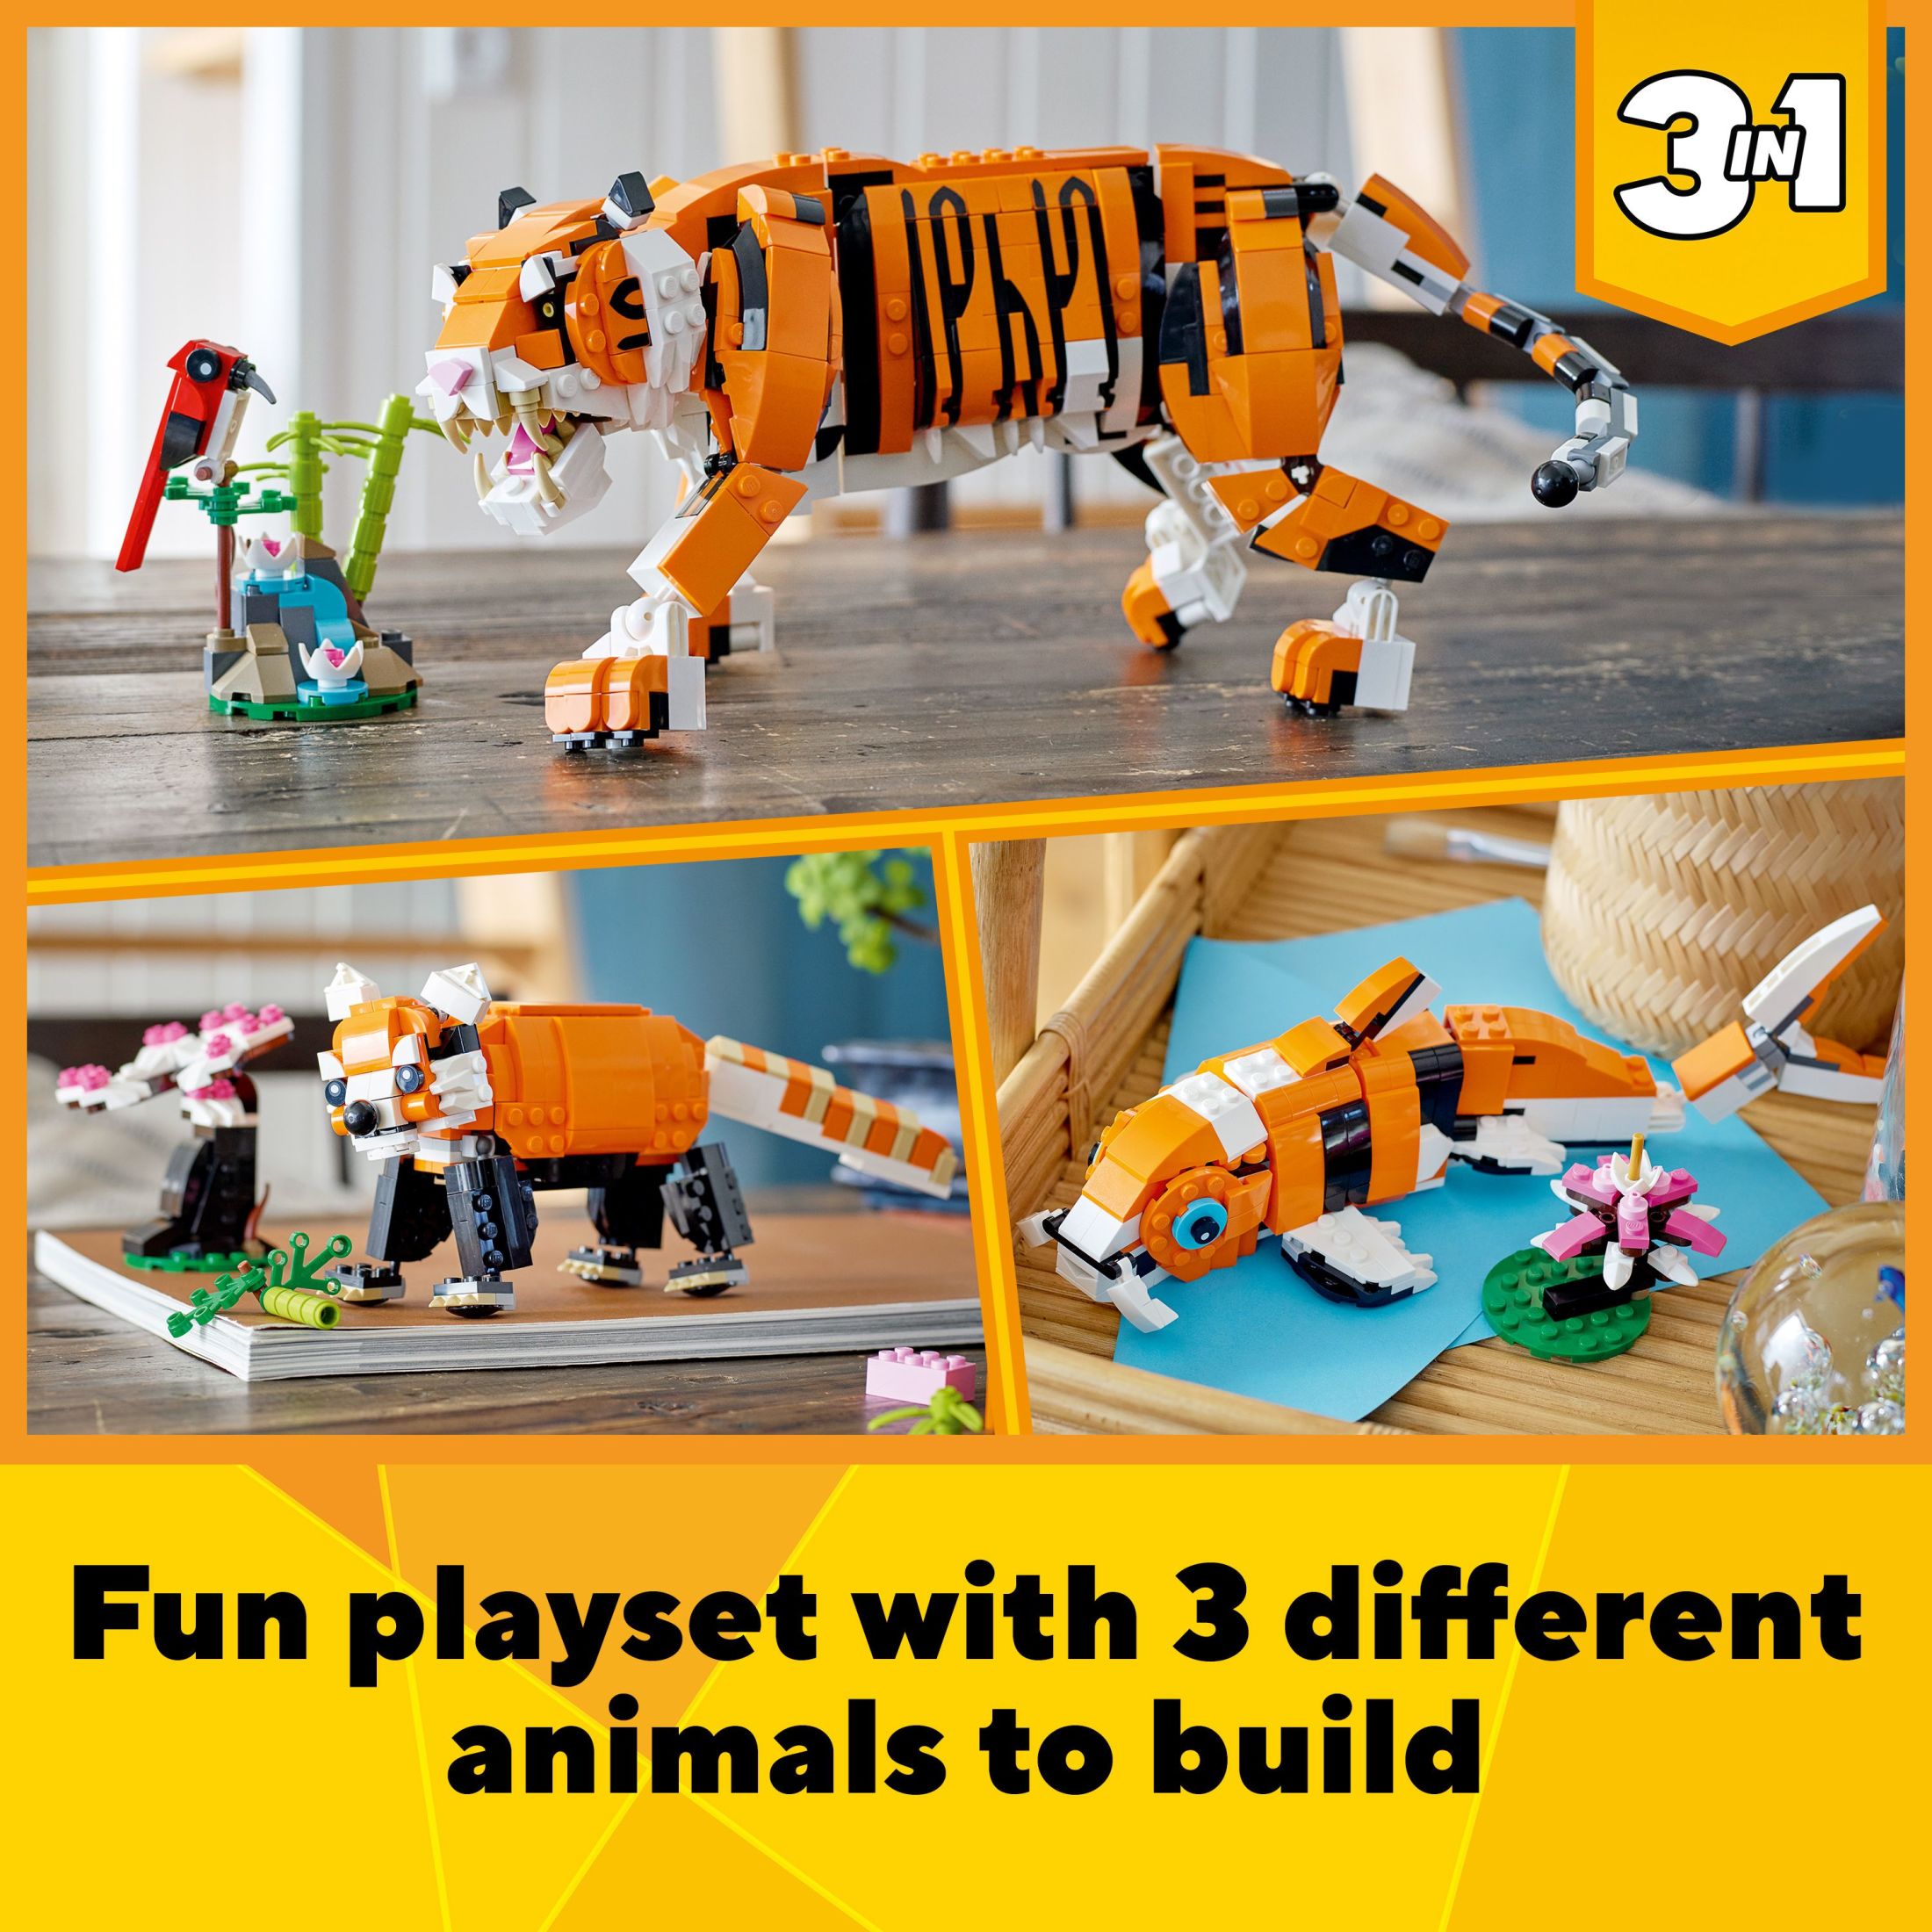 LEGO Creator 3 in 1 Majestic Tiger Building Set, Transforms from Tiger to Panda or Koi Fish Set, Animal Figures, Collectible Building Toy, Gifts for Kids, Boys & Girls 9 Plus Years Old, 31129 - image 5 of 9